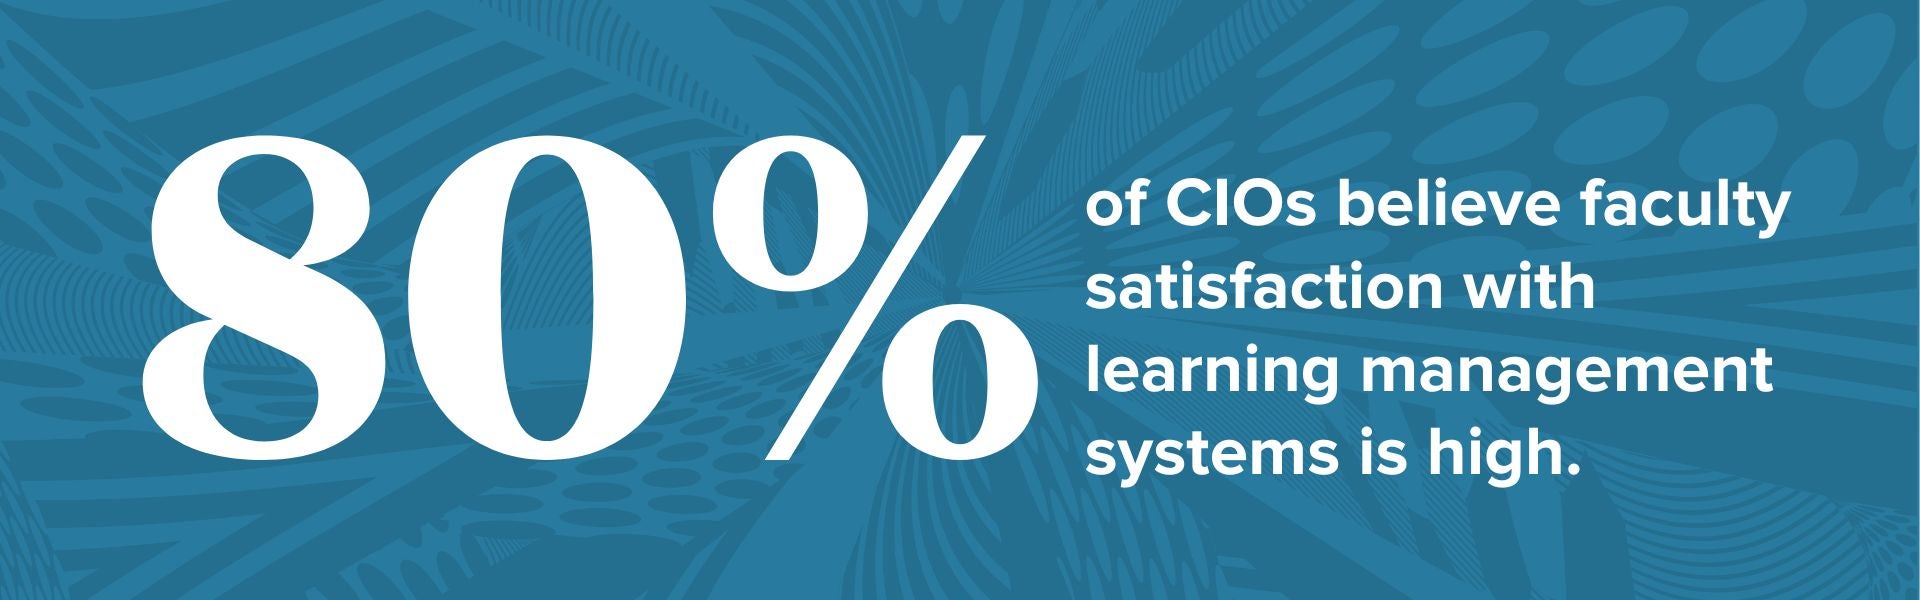 80% of CIOs believe faculty satisfaction with learning management systems is high.